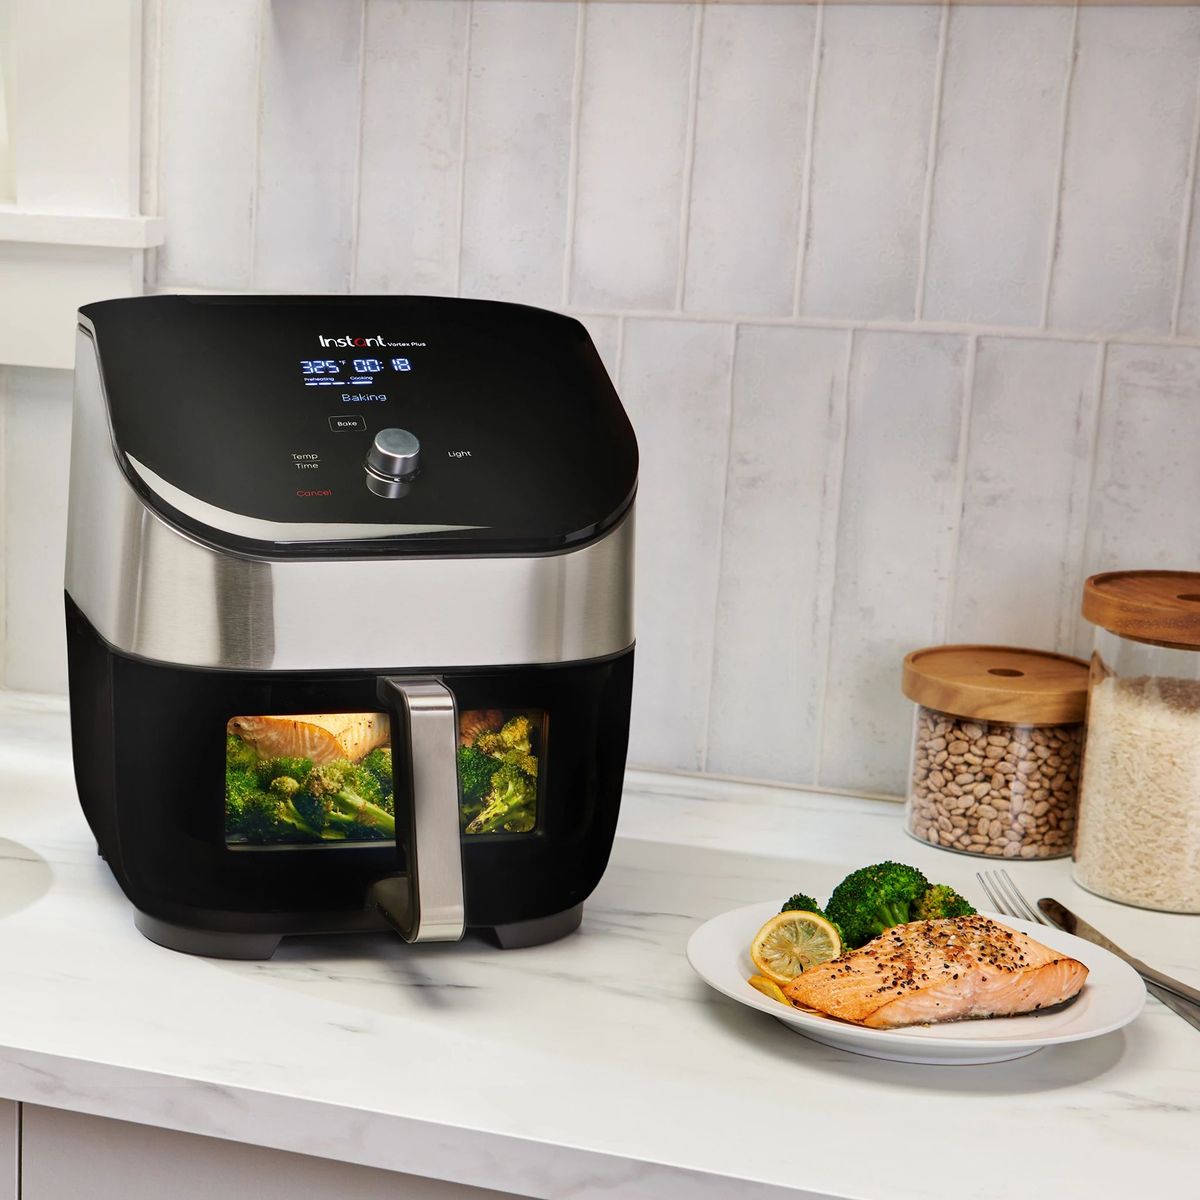 Dash Compact Air Fryer Review - The Best Air Fryer For Small Spaces